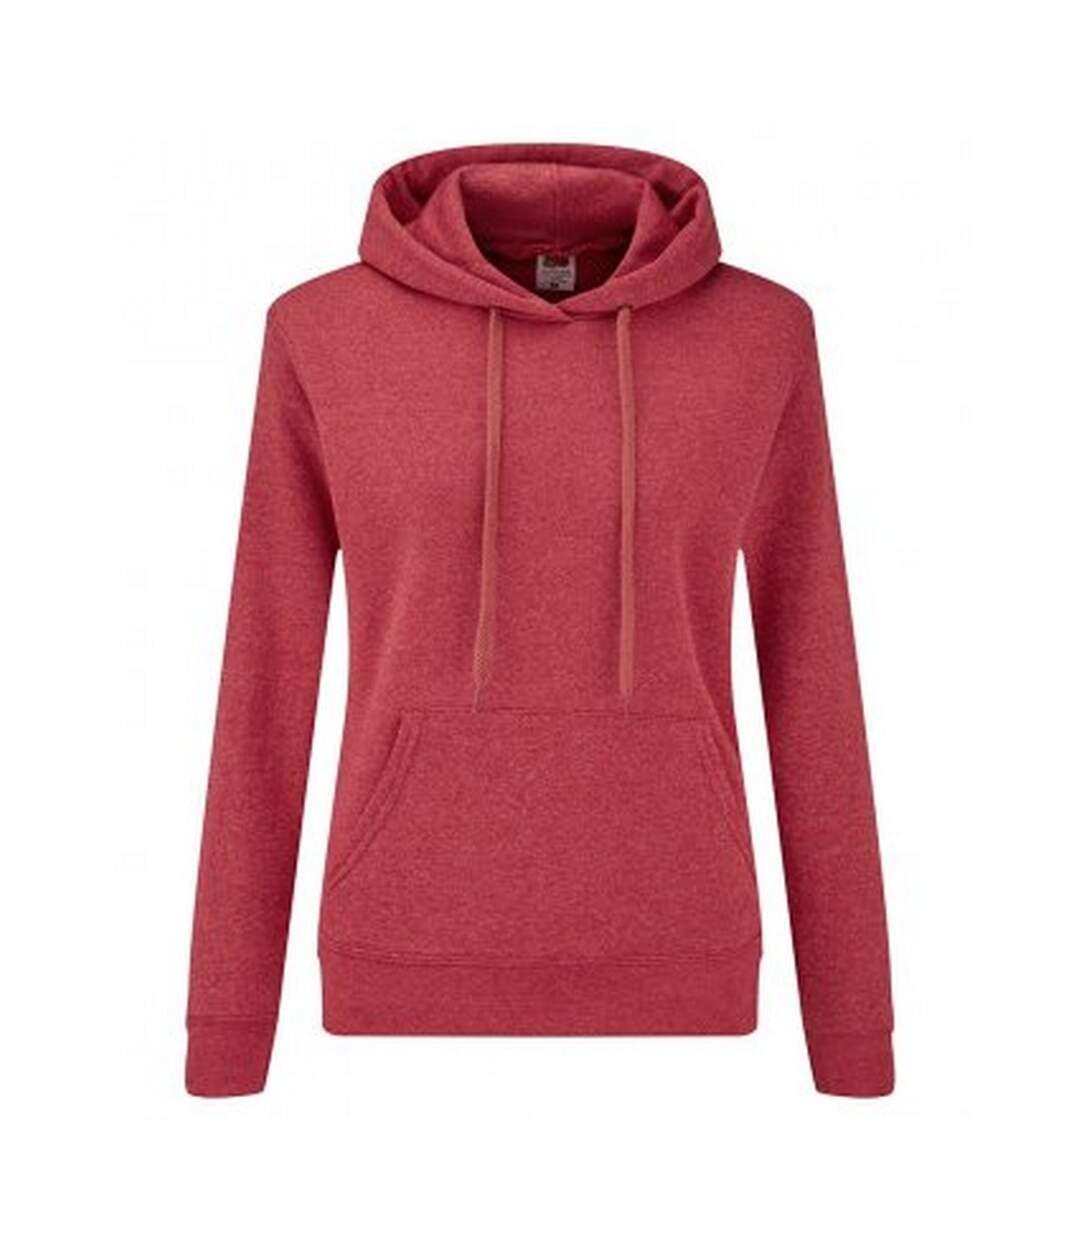 Fruit of the Loom Classic Lady Fit Hooded Sweatshirt (Red Heather)